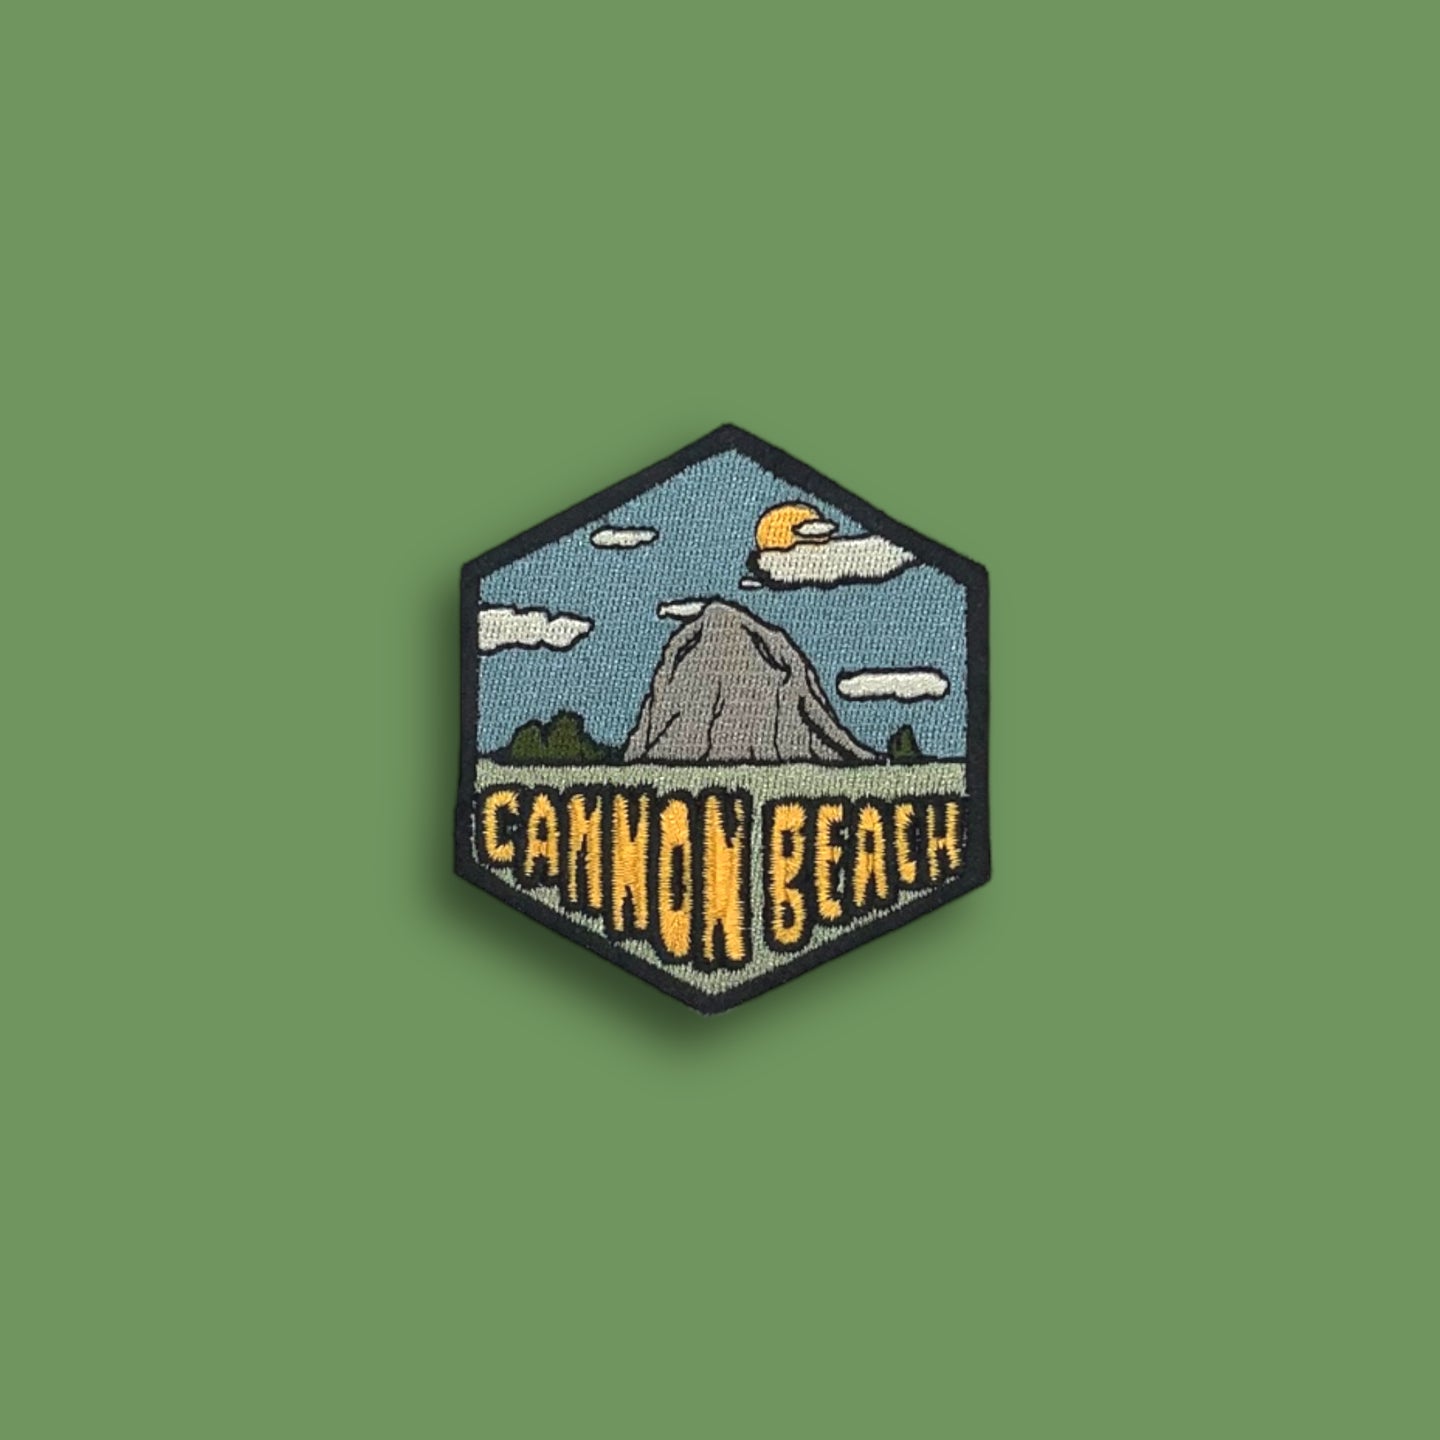 Cannon Beach, Oregon- Embroidered Hexagon Patch